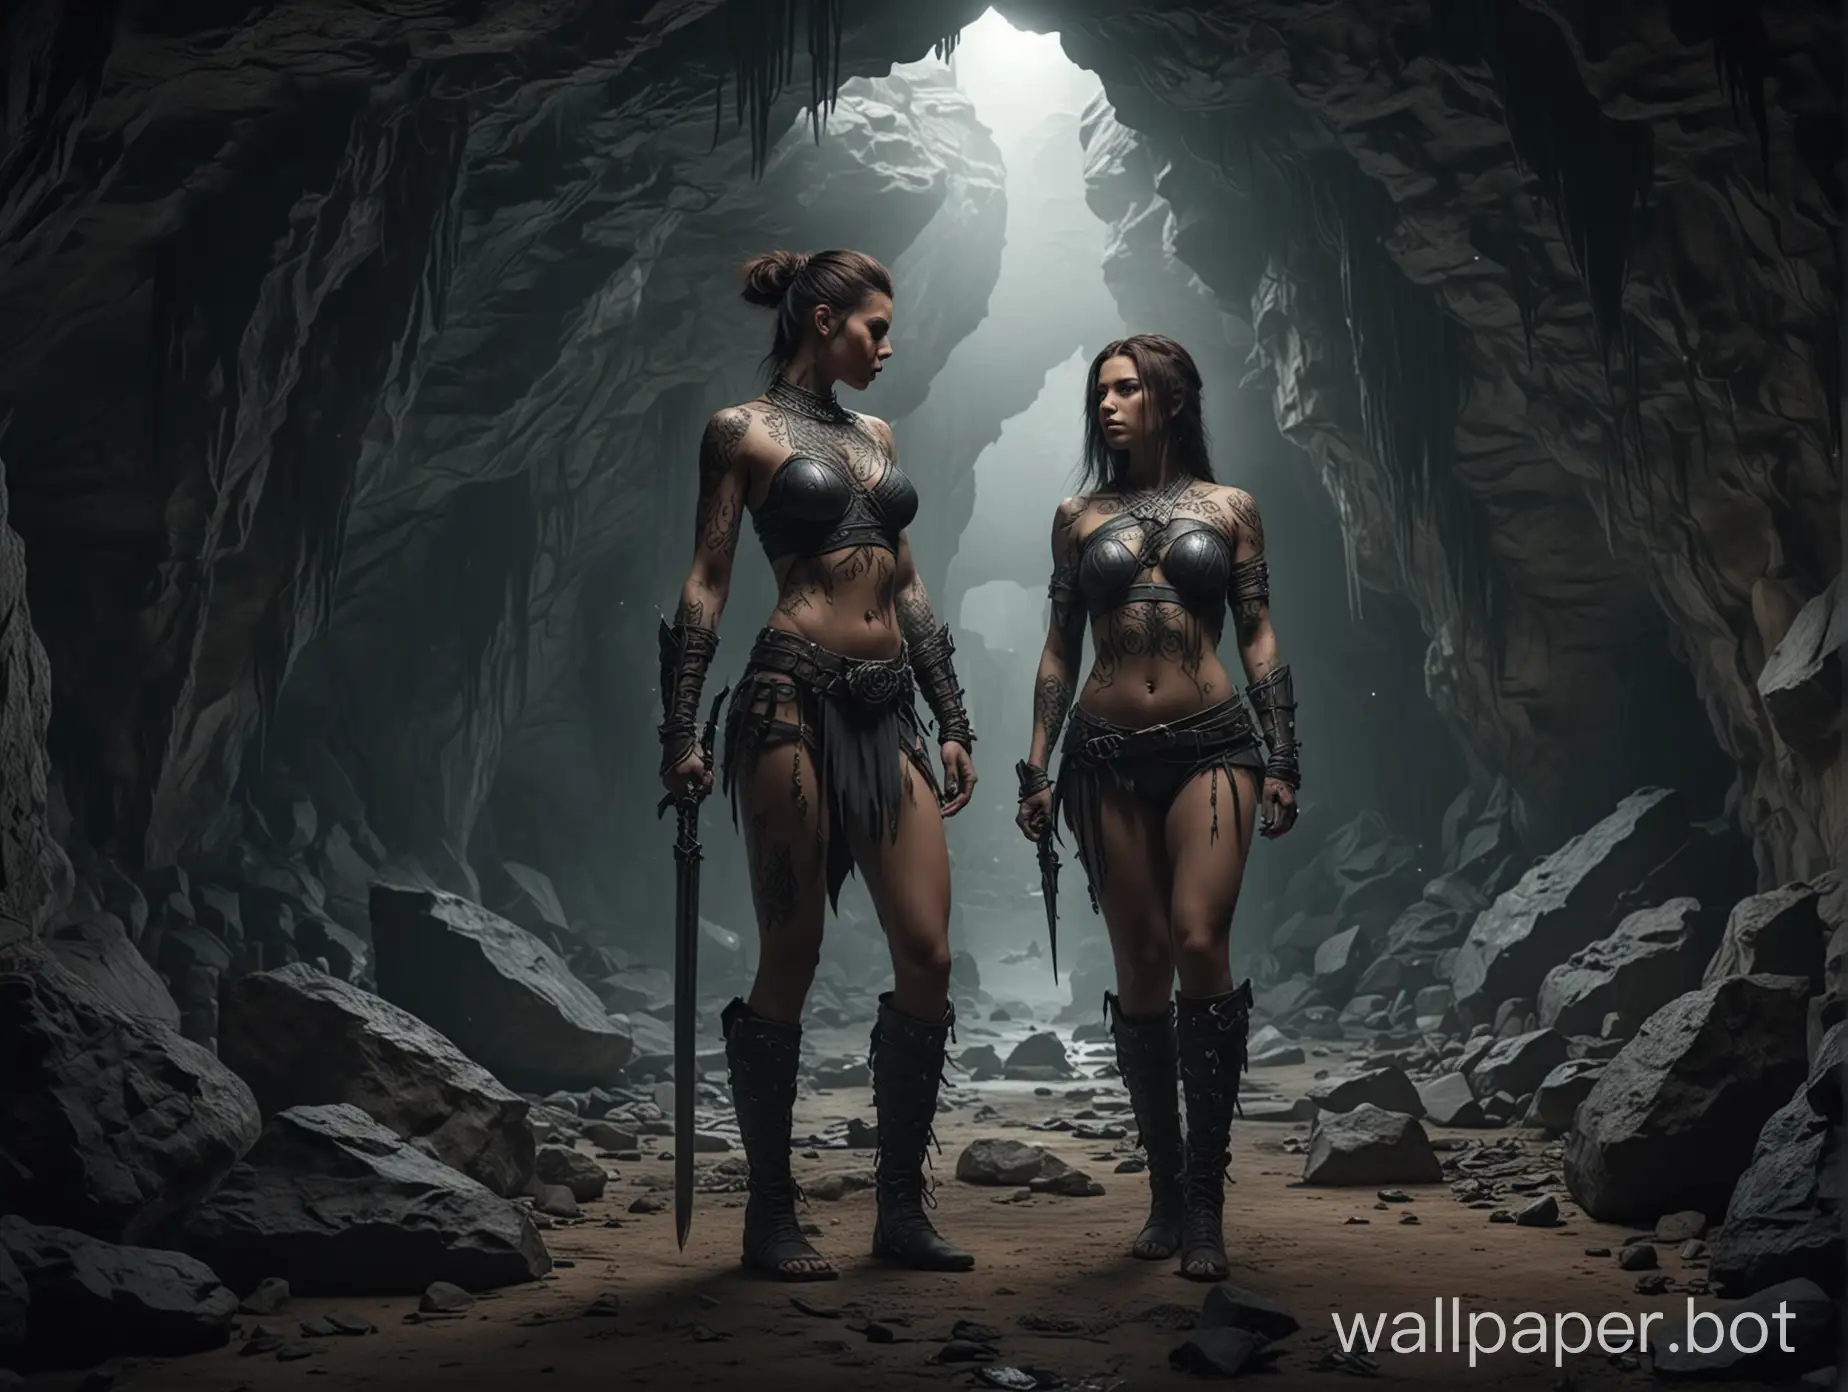 Mystical-Warrior-Woman-with-Intricate-Tattoos-in-Enigmatic-Cave-Setting